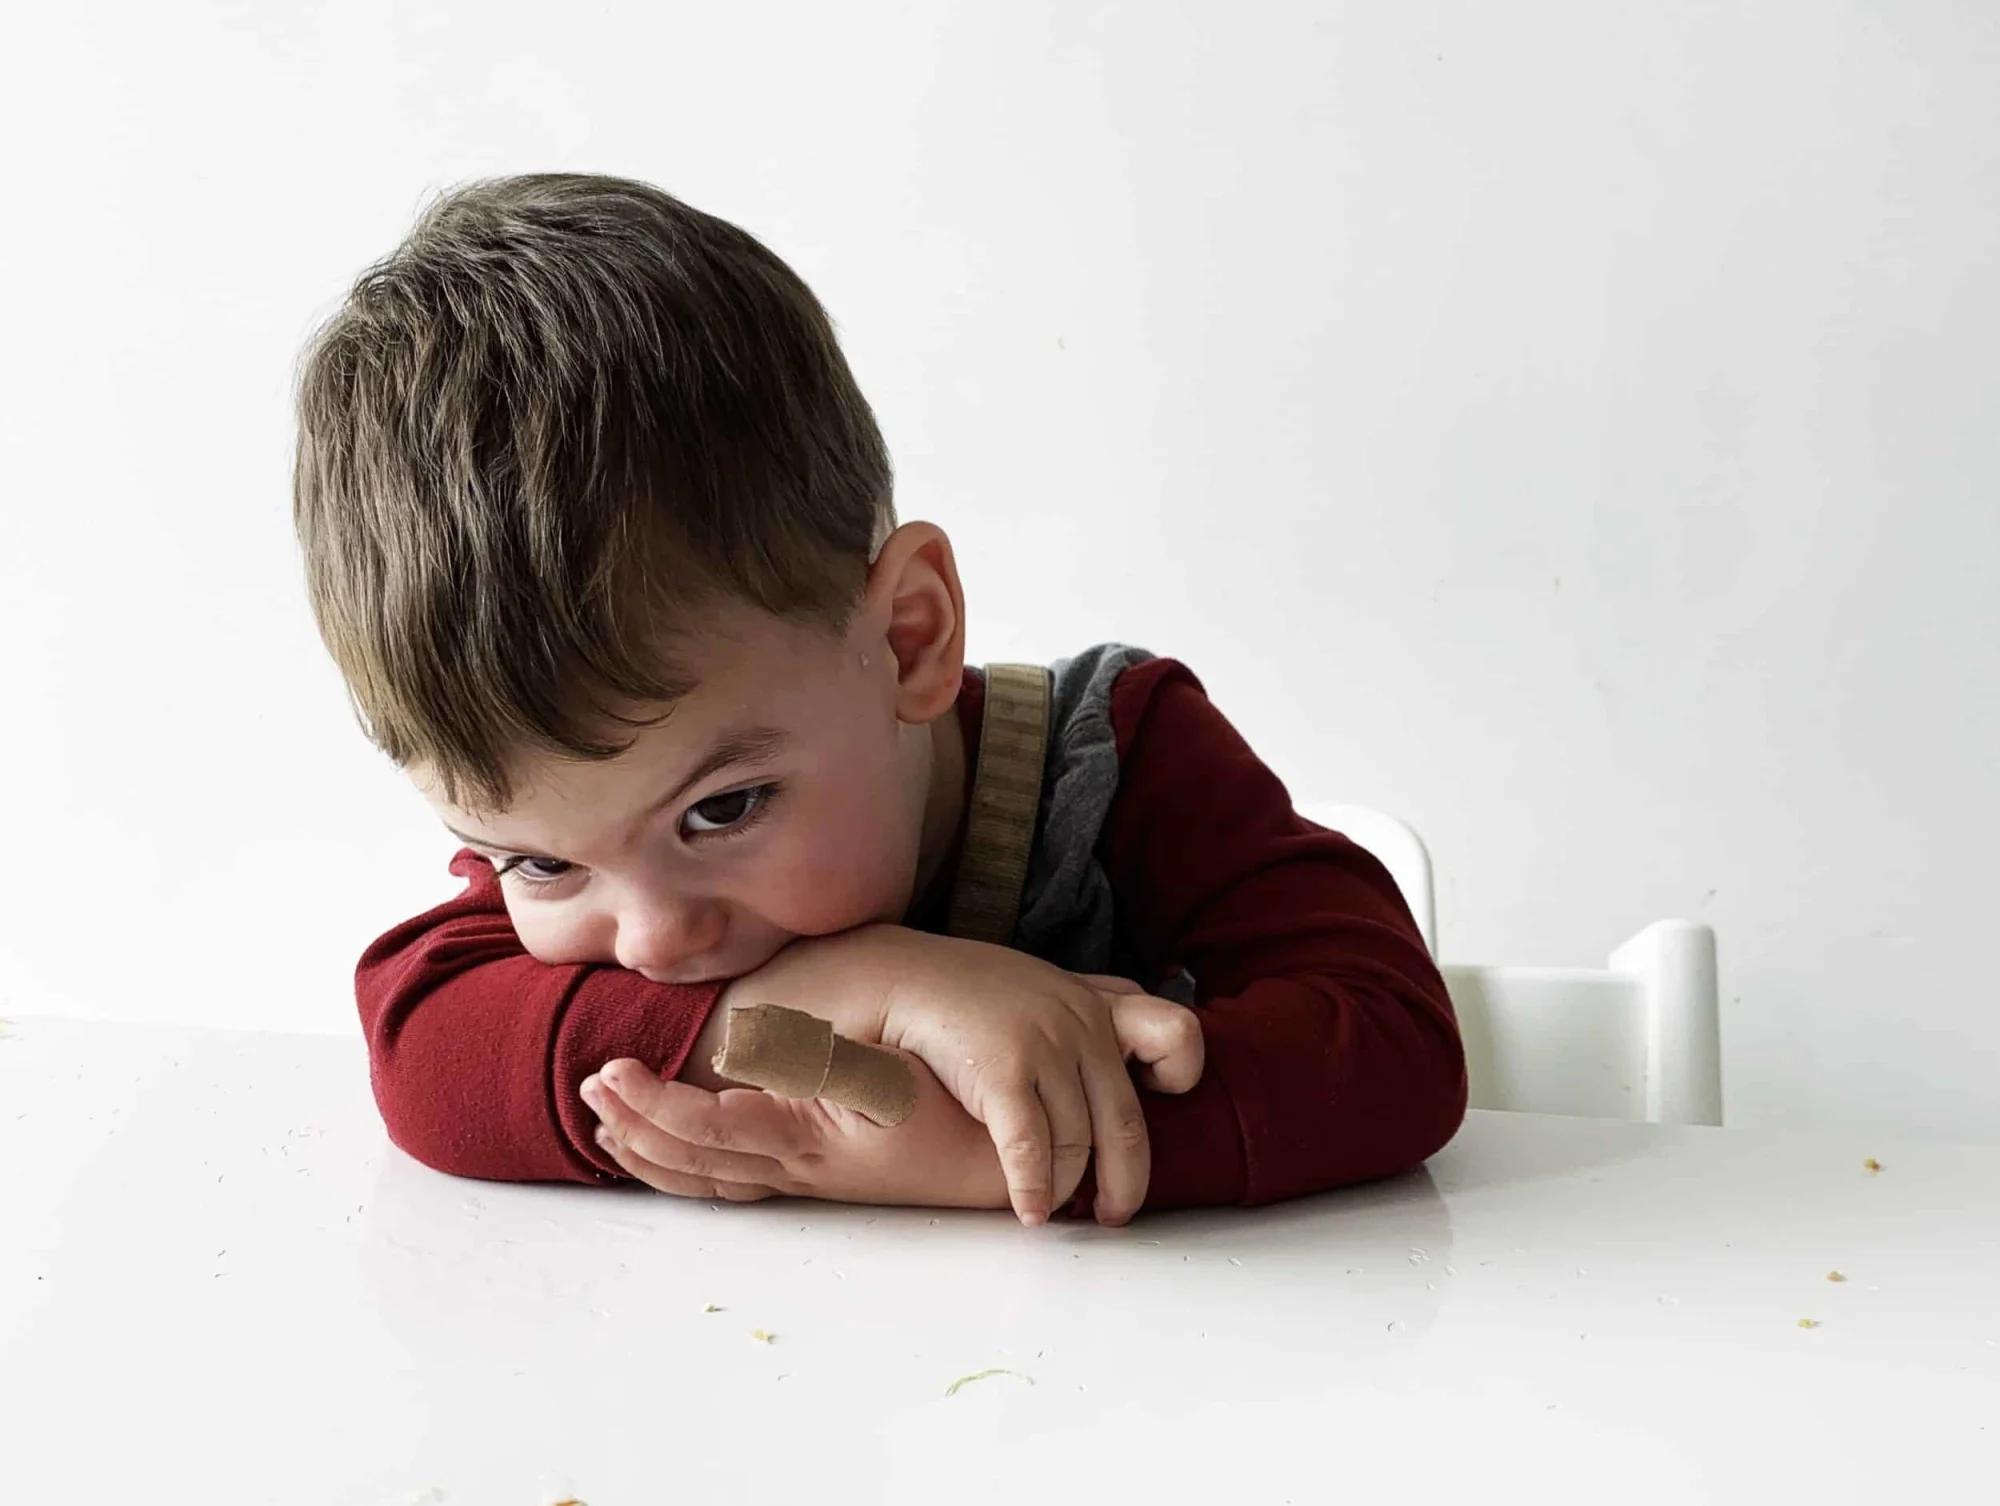 A toddler puts his head down on a table at a meal